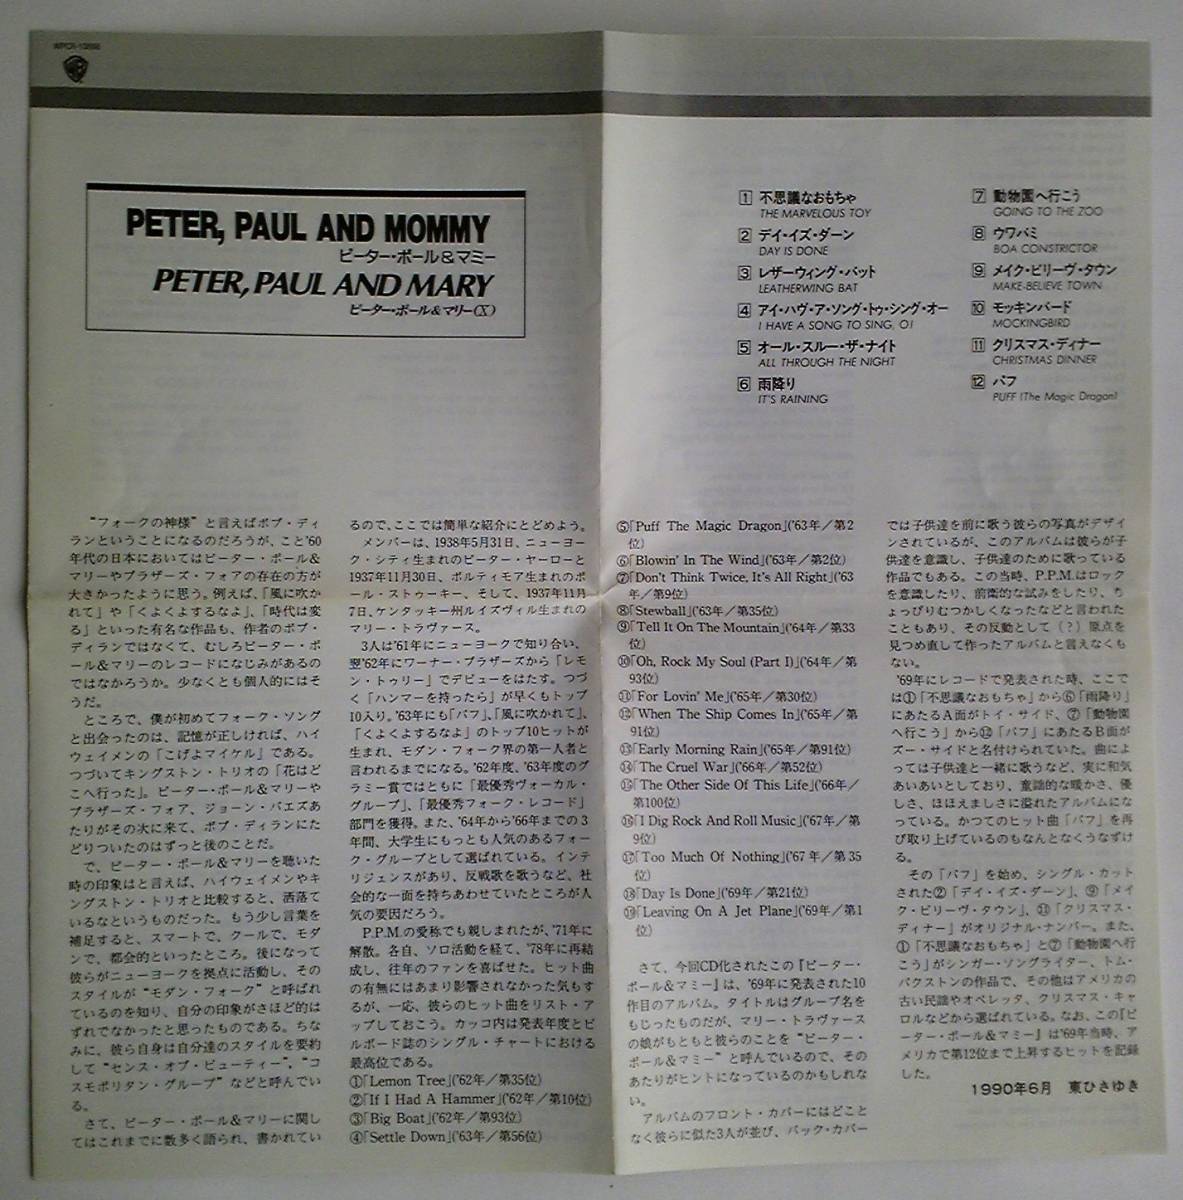 【CD】Peter, Paul and Mary（ピーター・ポール&マリー）「Peter, Paul and Mommy」ー歌詞・対訳付ー 匿名配送・送料無料